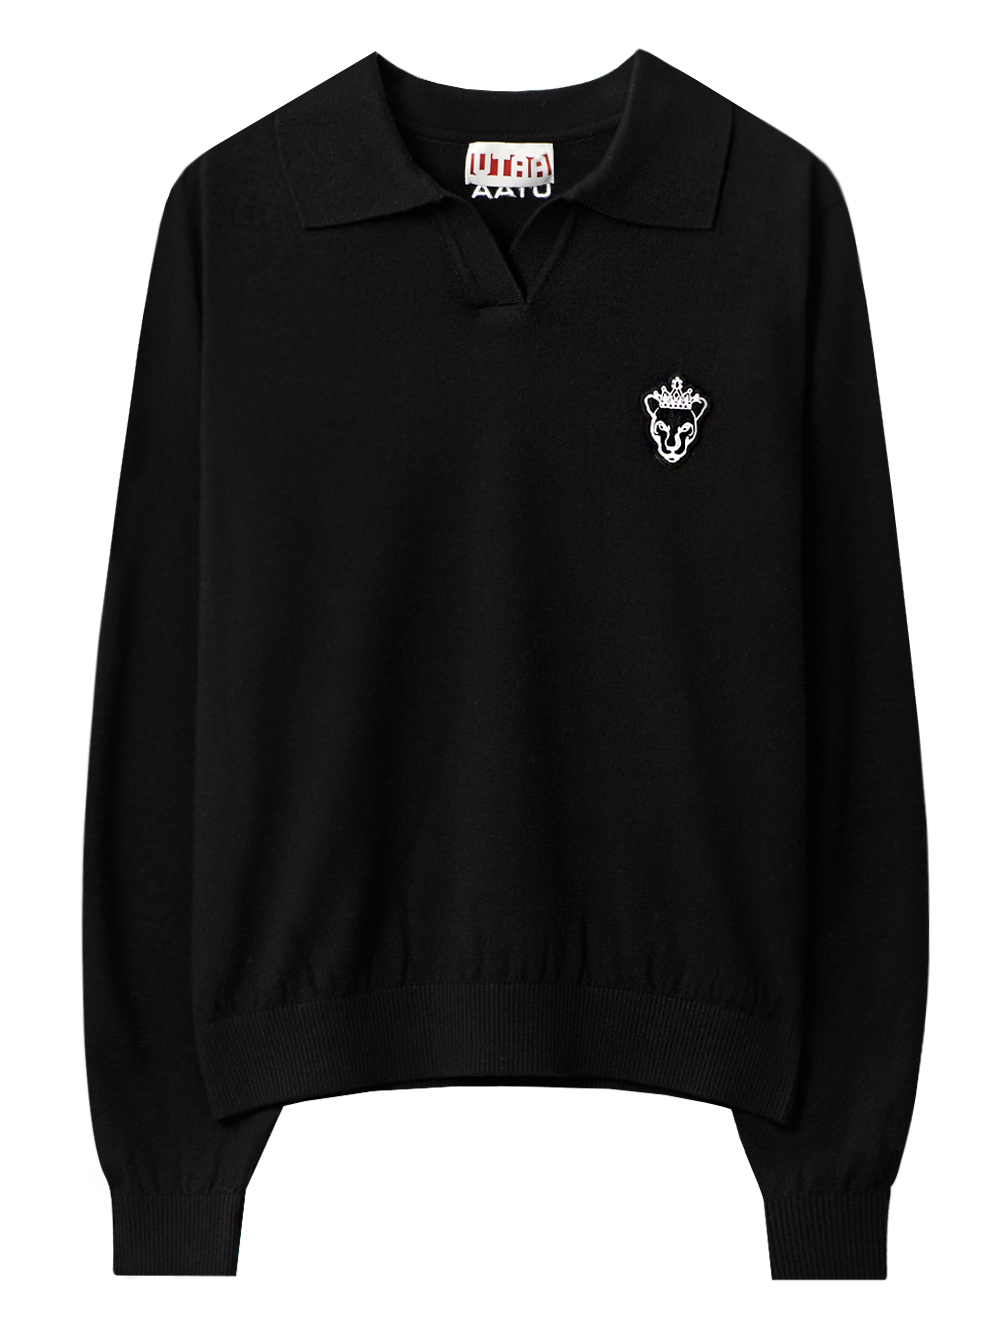 UTAA Panther Openneck Knit Pullover : Men&#039;s Black(UC1KTM413BK)